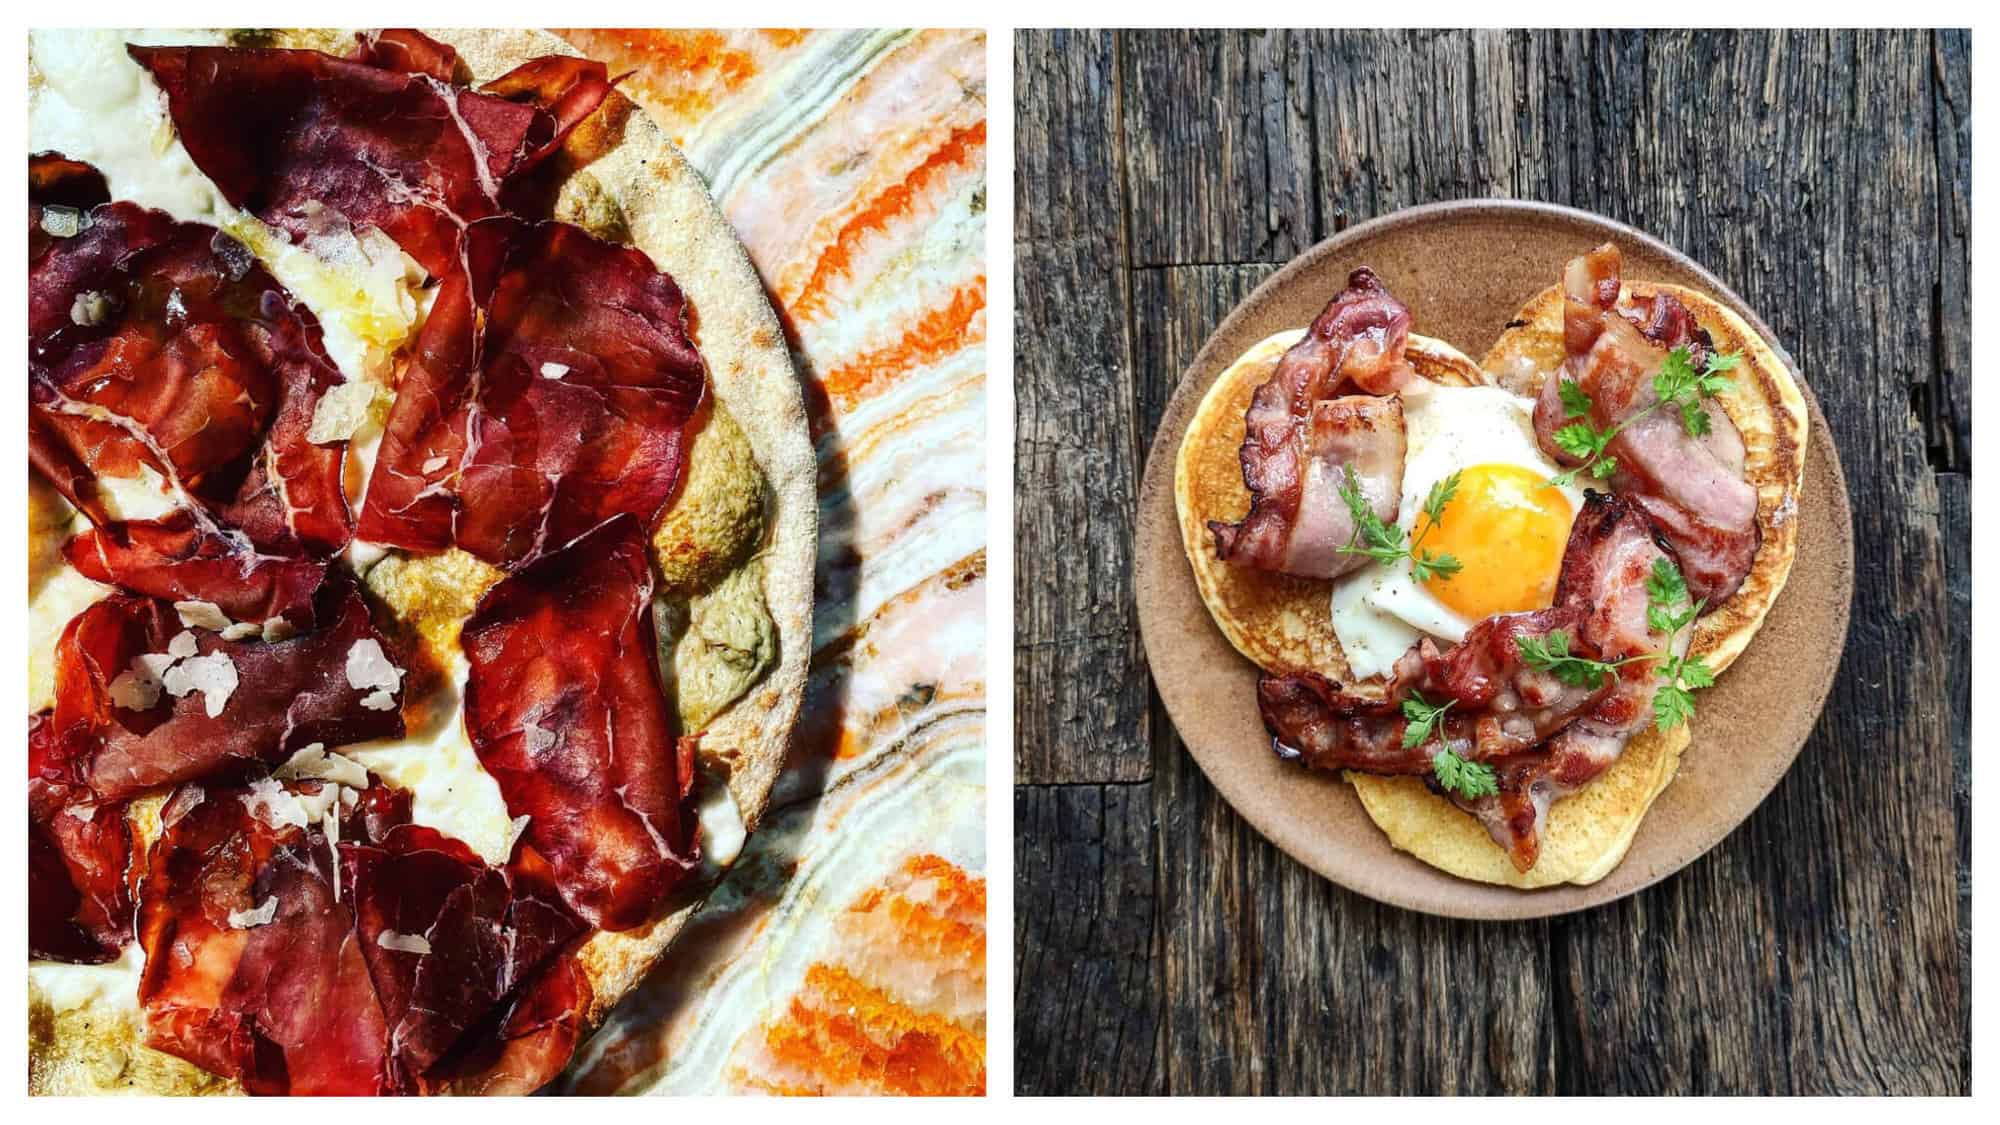 Left: a pizza on a table at the restaurant Bonvivant. Right: pancakes with an egg and bacon on a table at the restaurant Chinaski.